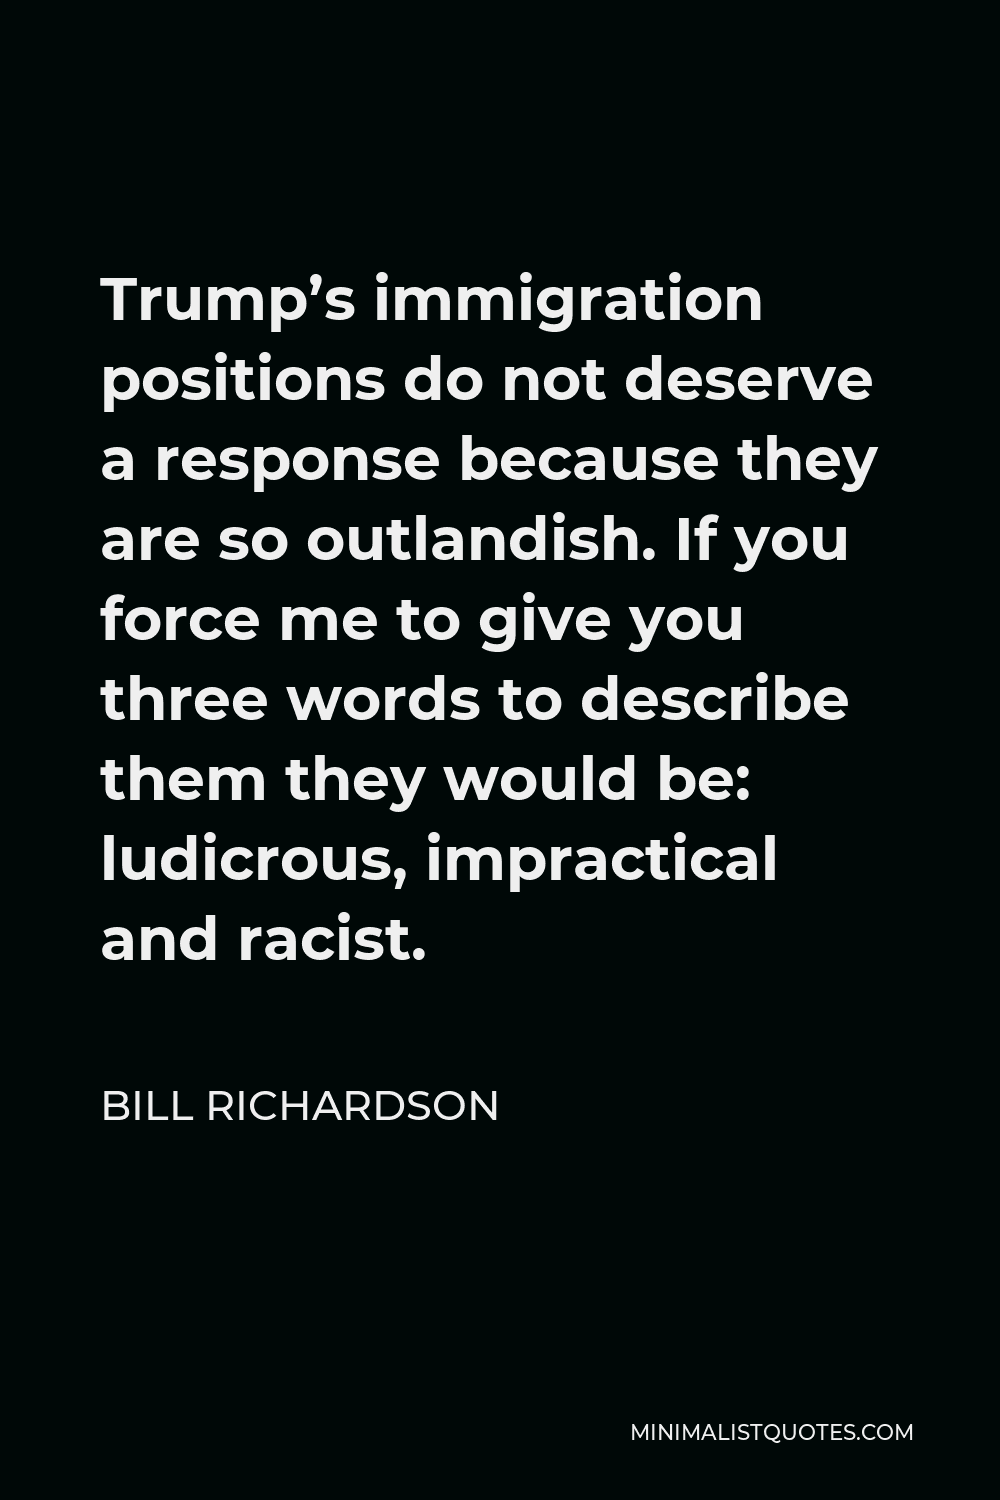 Bill Richardson Quote - Trump’s immigration positions do not deserve a response because they are so outlandish. If you force me to give you three words to describe them they would be: ludicrous, impractical and racist.